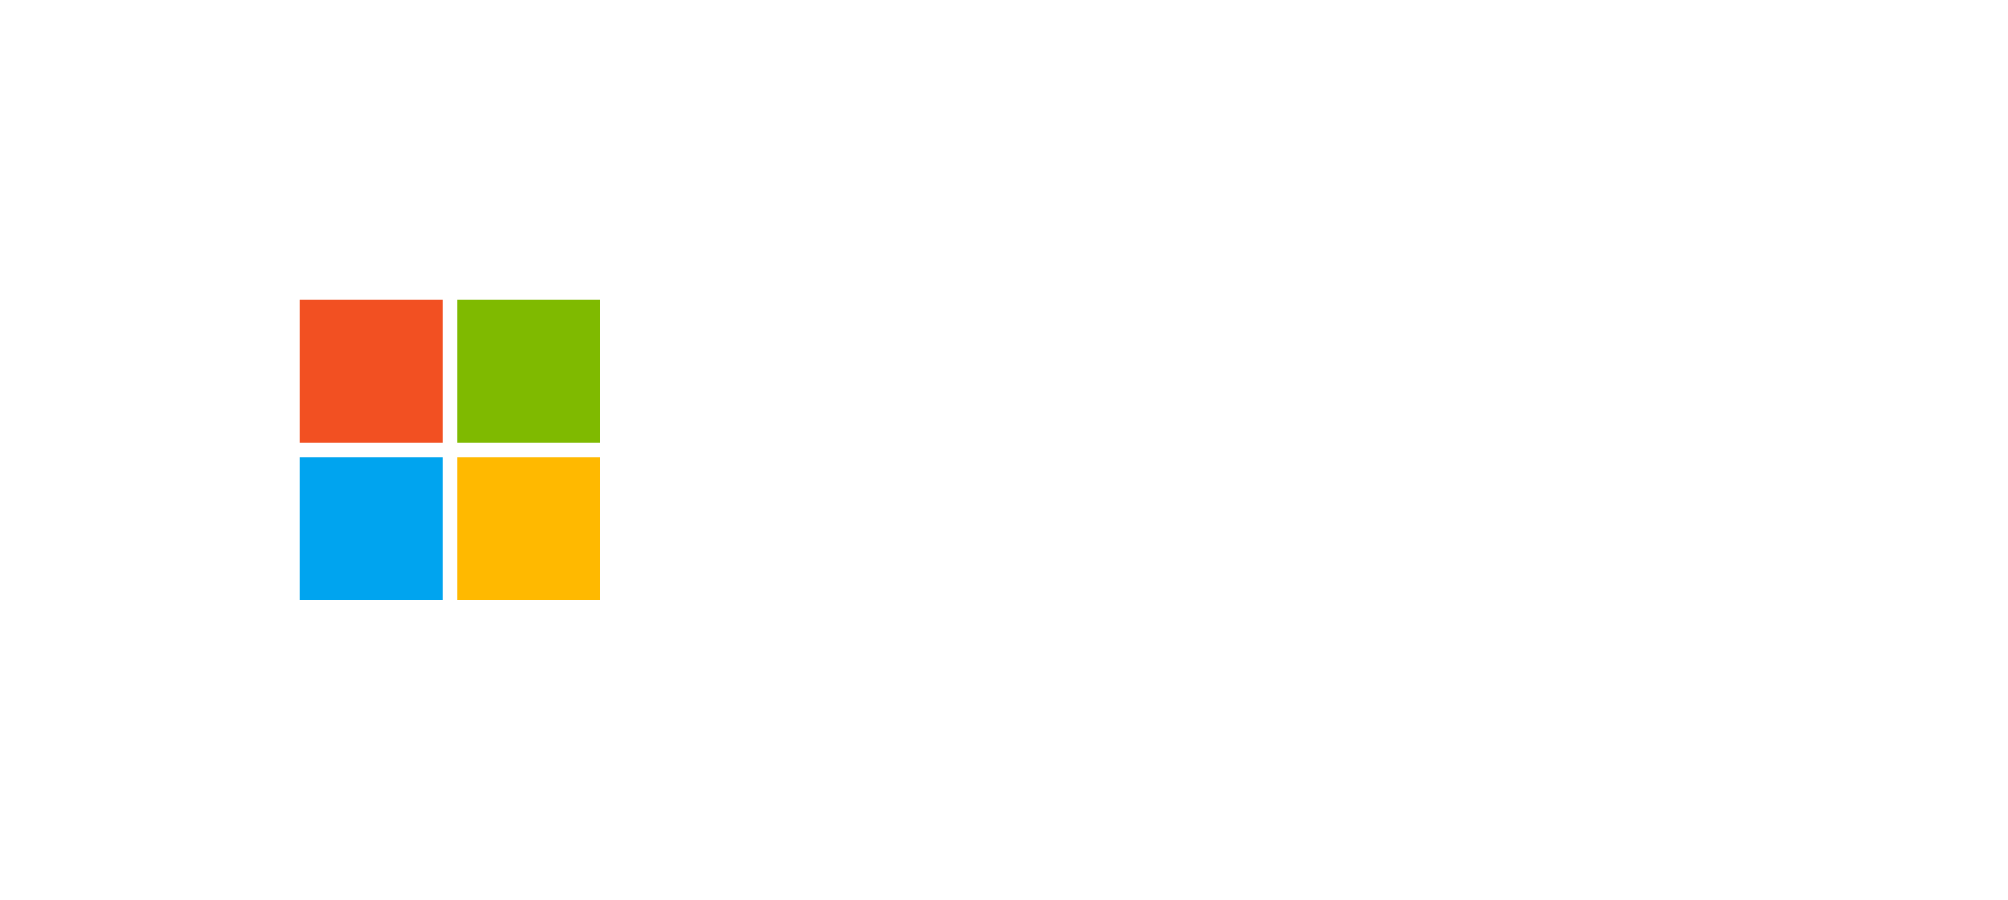 Microsoft Services Logo - Services Blog – Services news and announcements